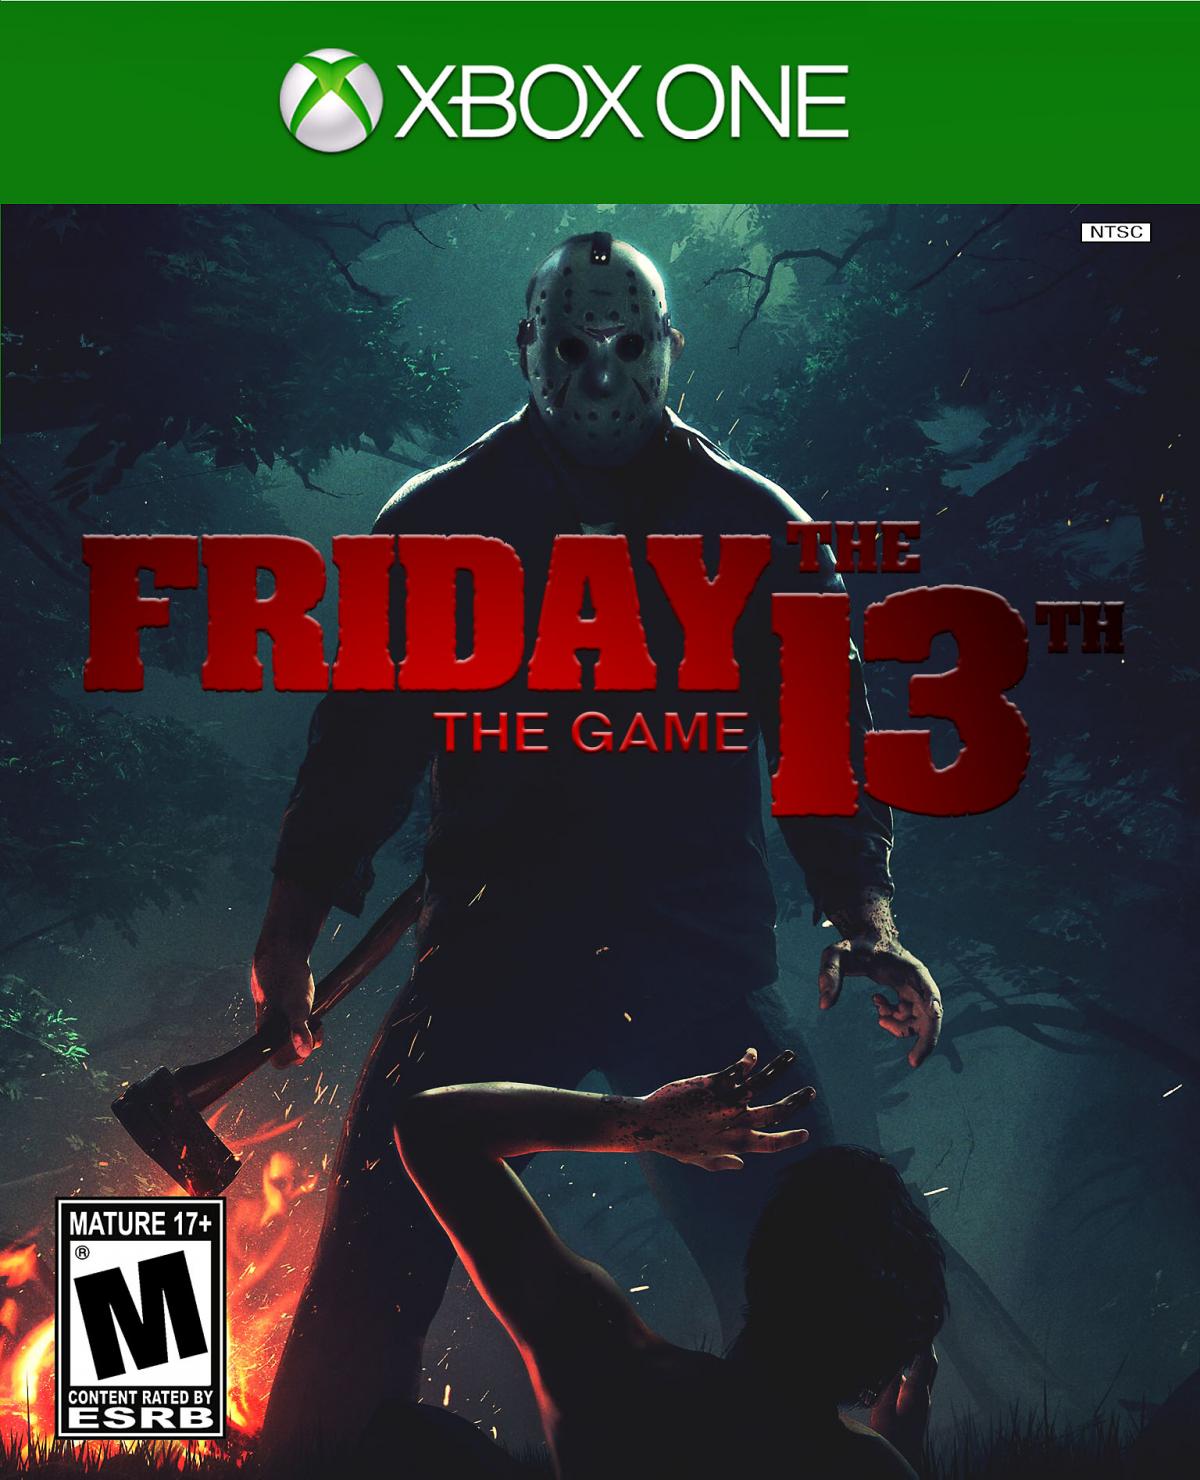 Friday The 13th Game on X: Get your face up in the game at retailers  around the world! Friday the 13th: The Game is out now on Xbox One and PS4  for